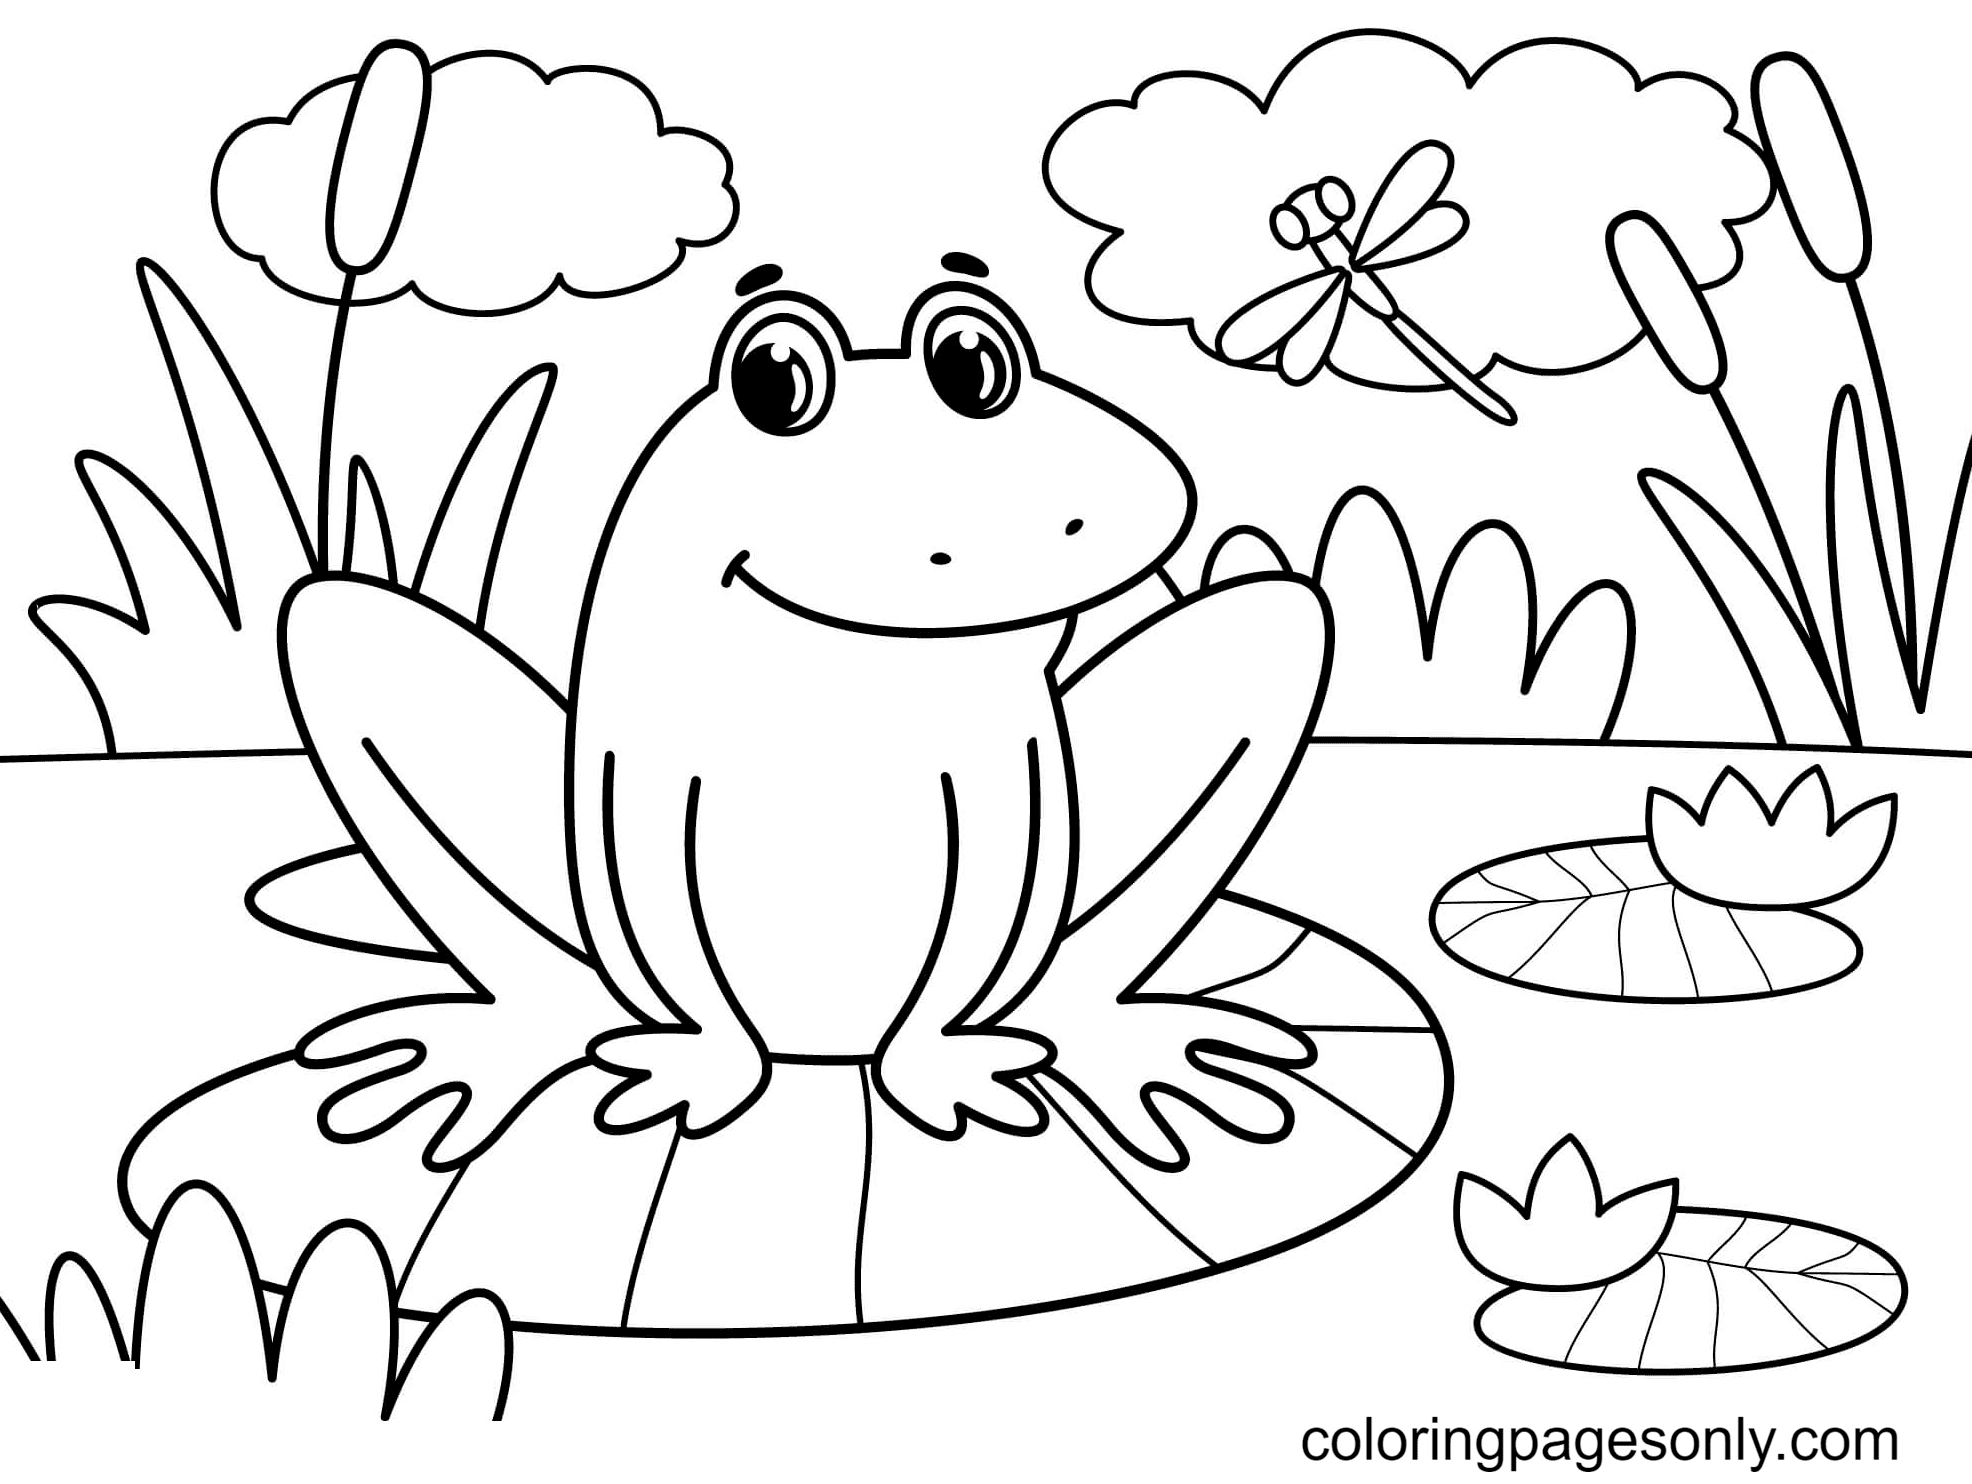 Frog Sitting On a Leaf Looking a Dragonfly Coloring Pages